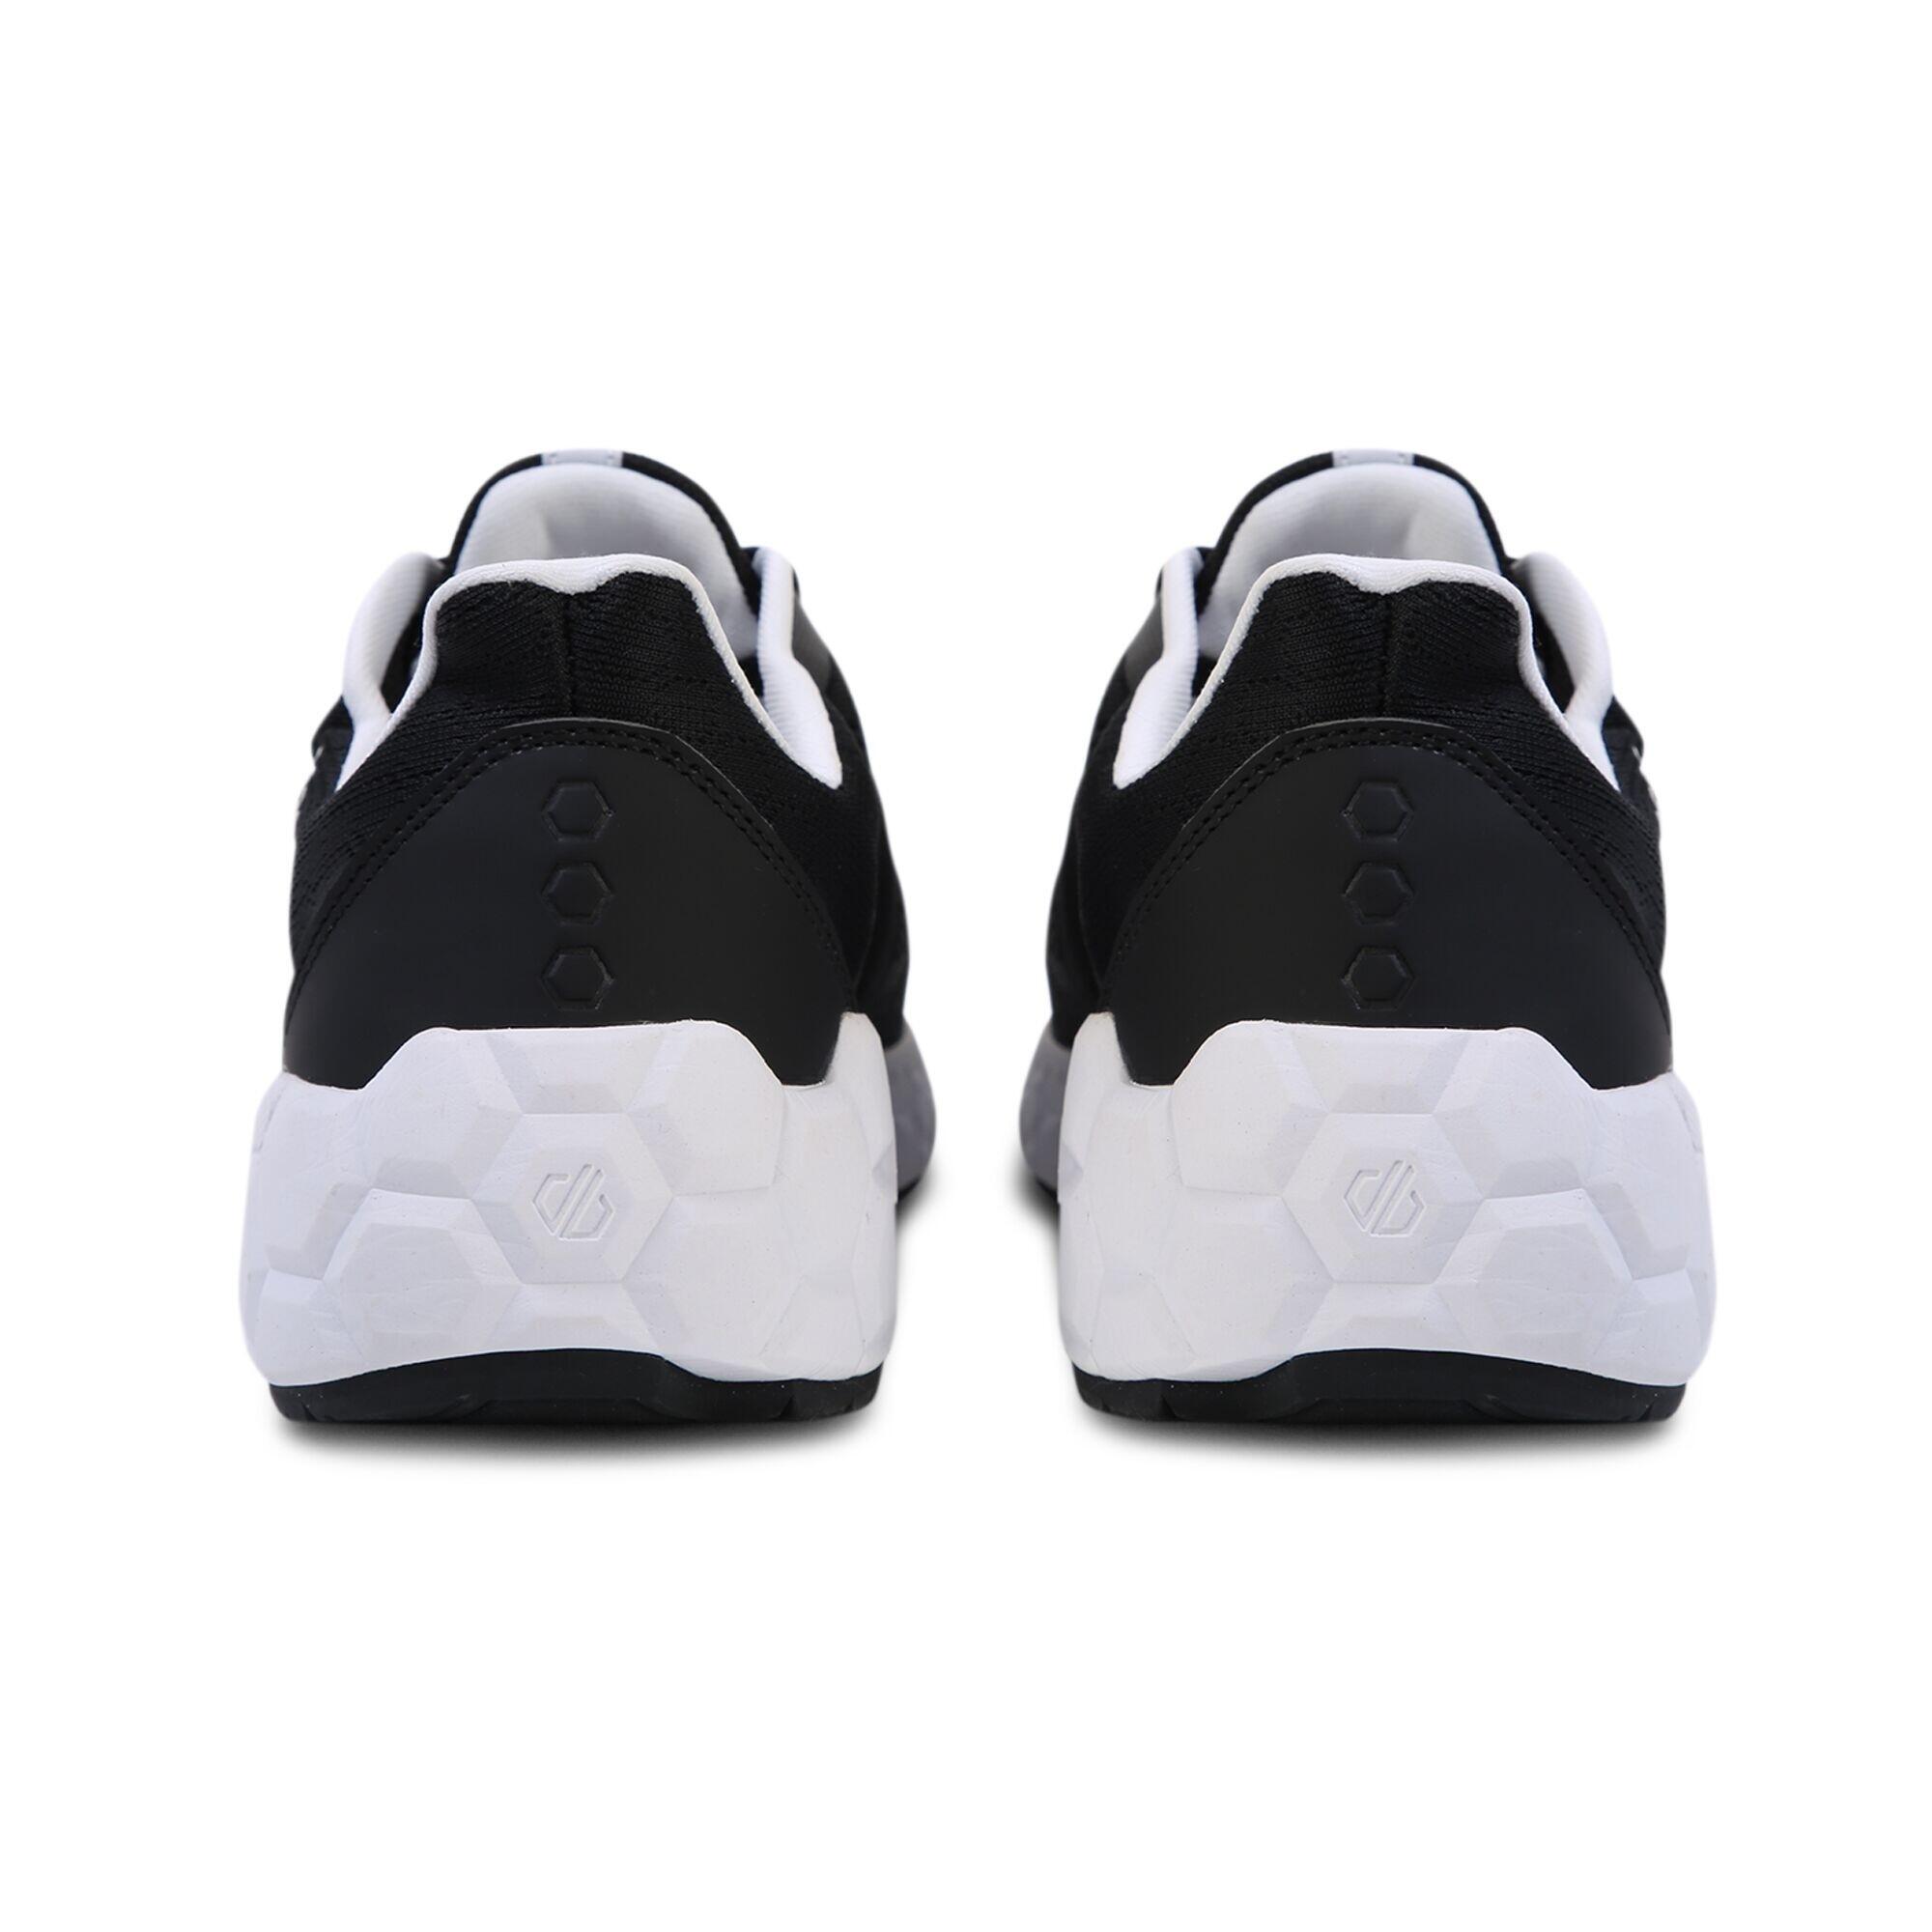 Mens Hex Rapid Performance Trainers (Black/White) 2/5